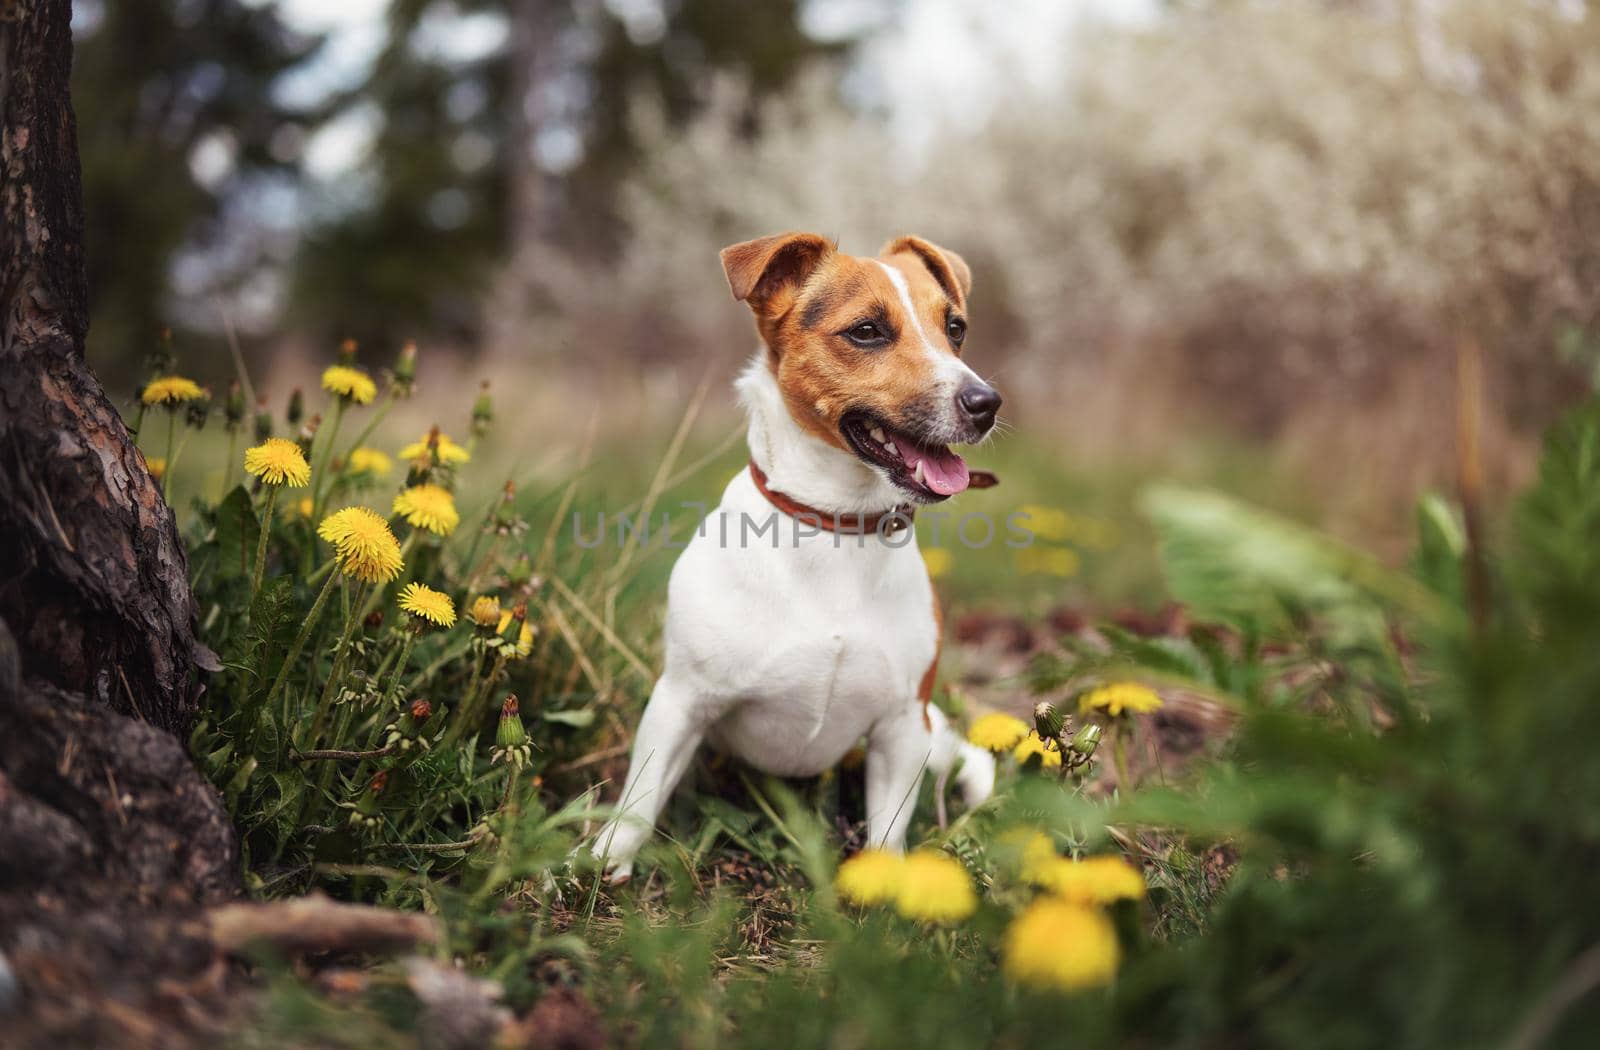 Small Jack Russell terrier sitting on meadow in spring, yellow dandelion flowers near by Ivanko